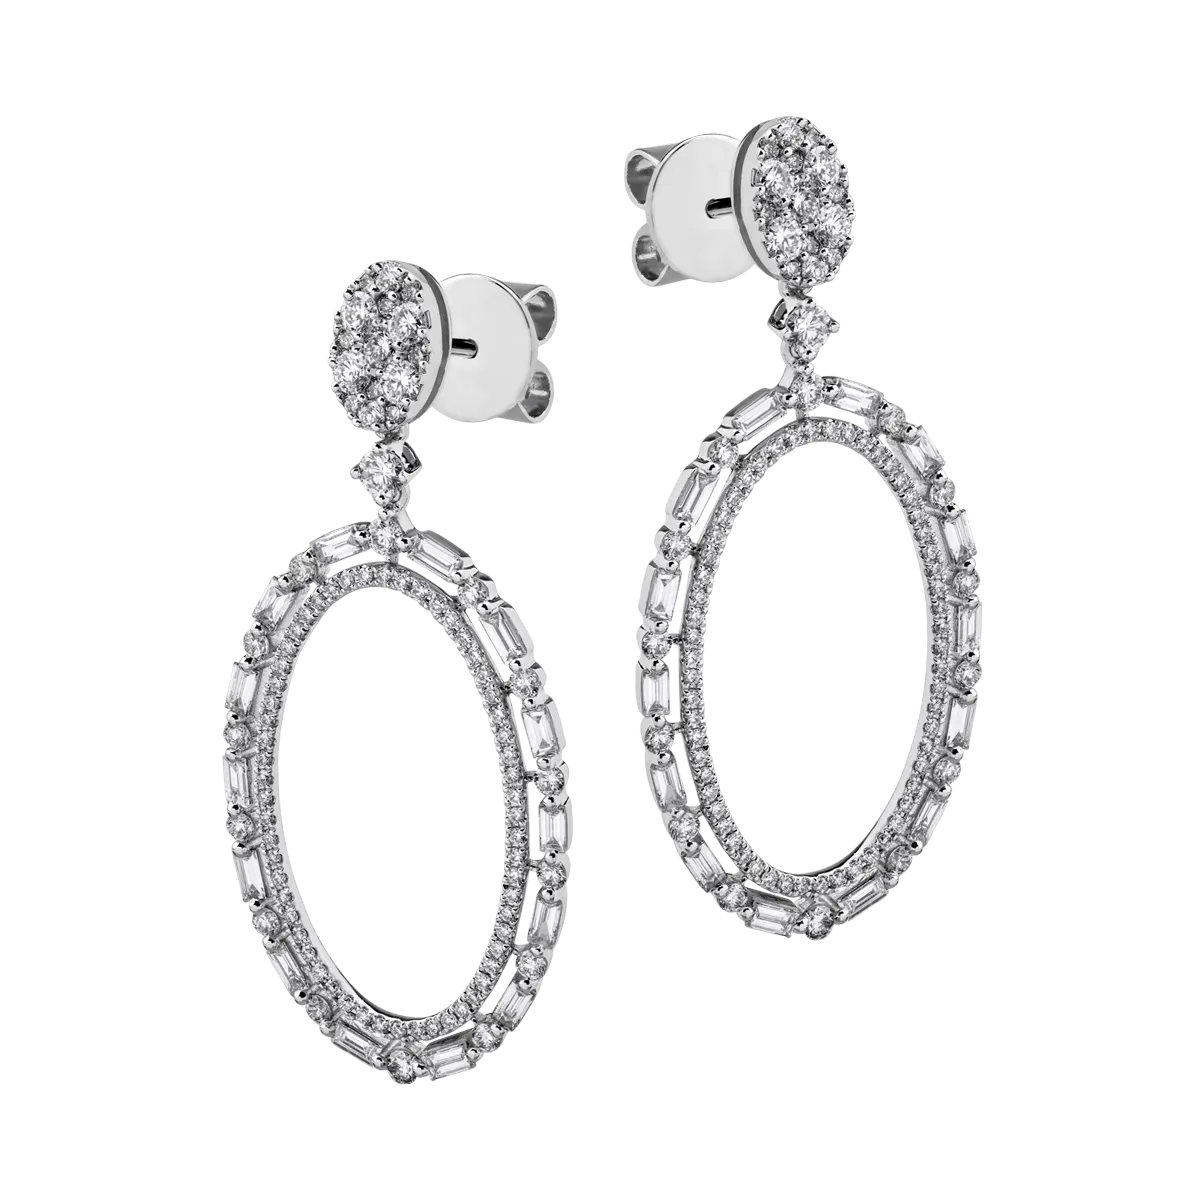 18K white gold earrings with 1.98ct diamonds